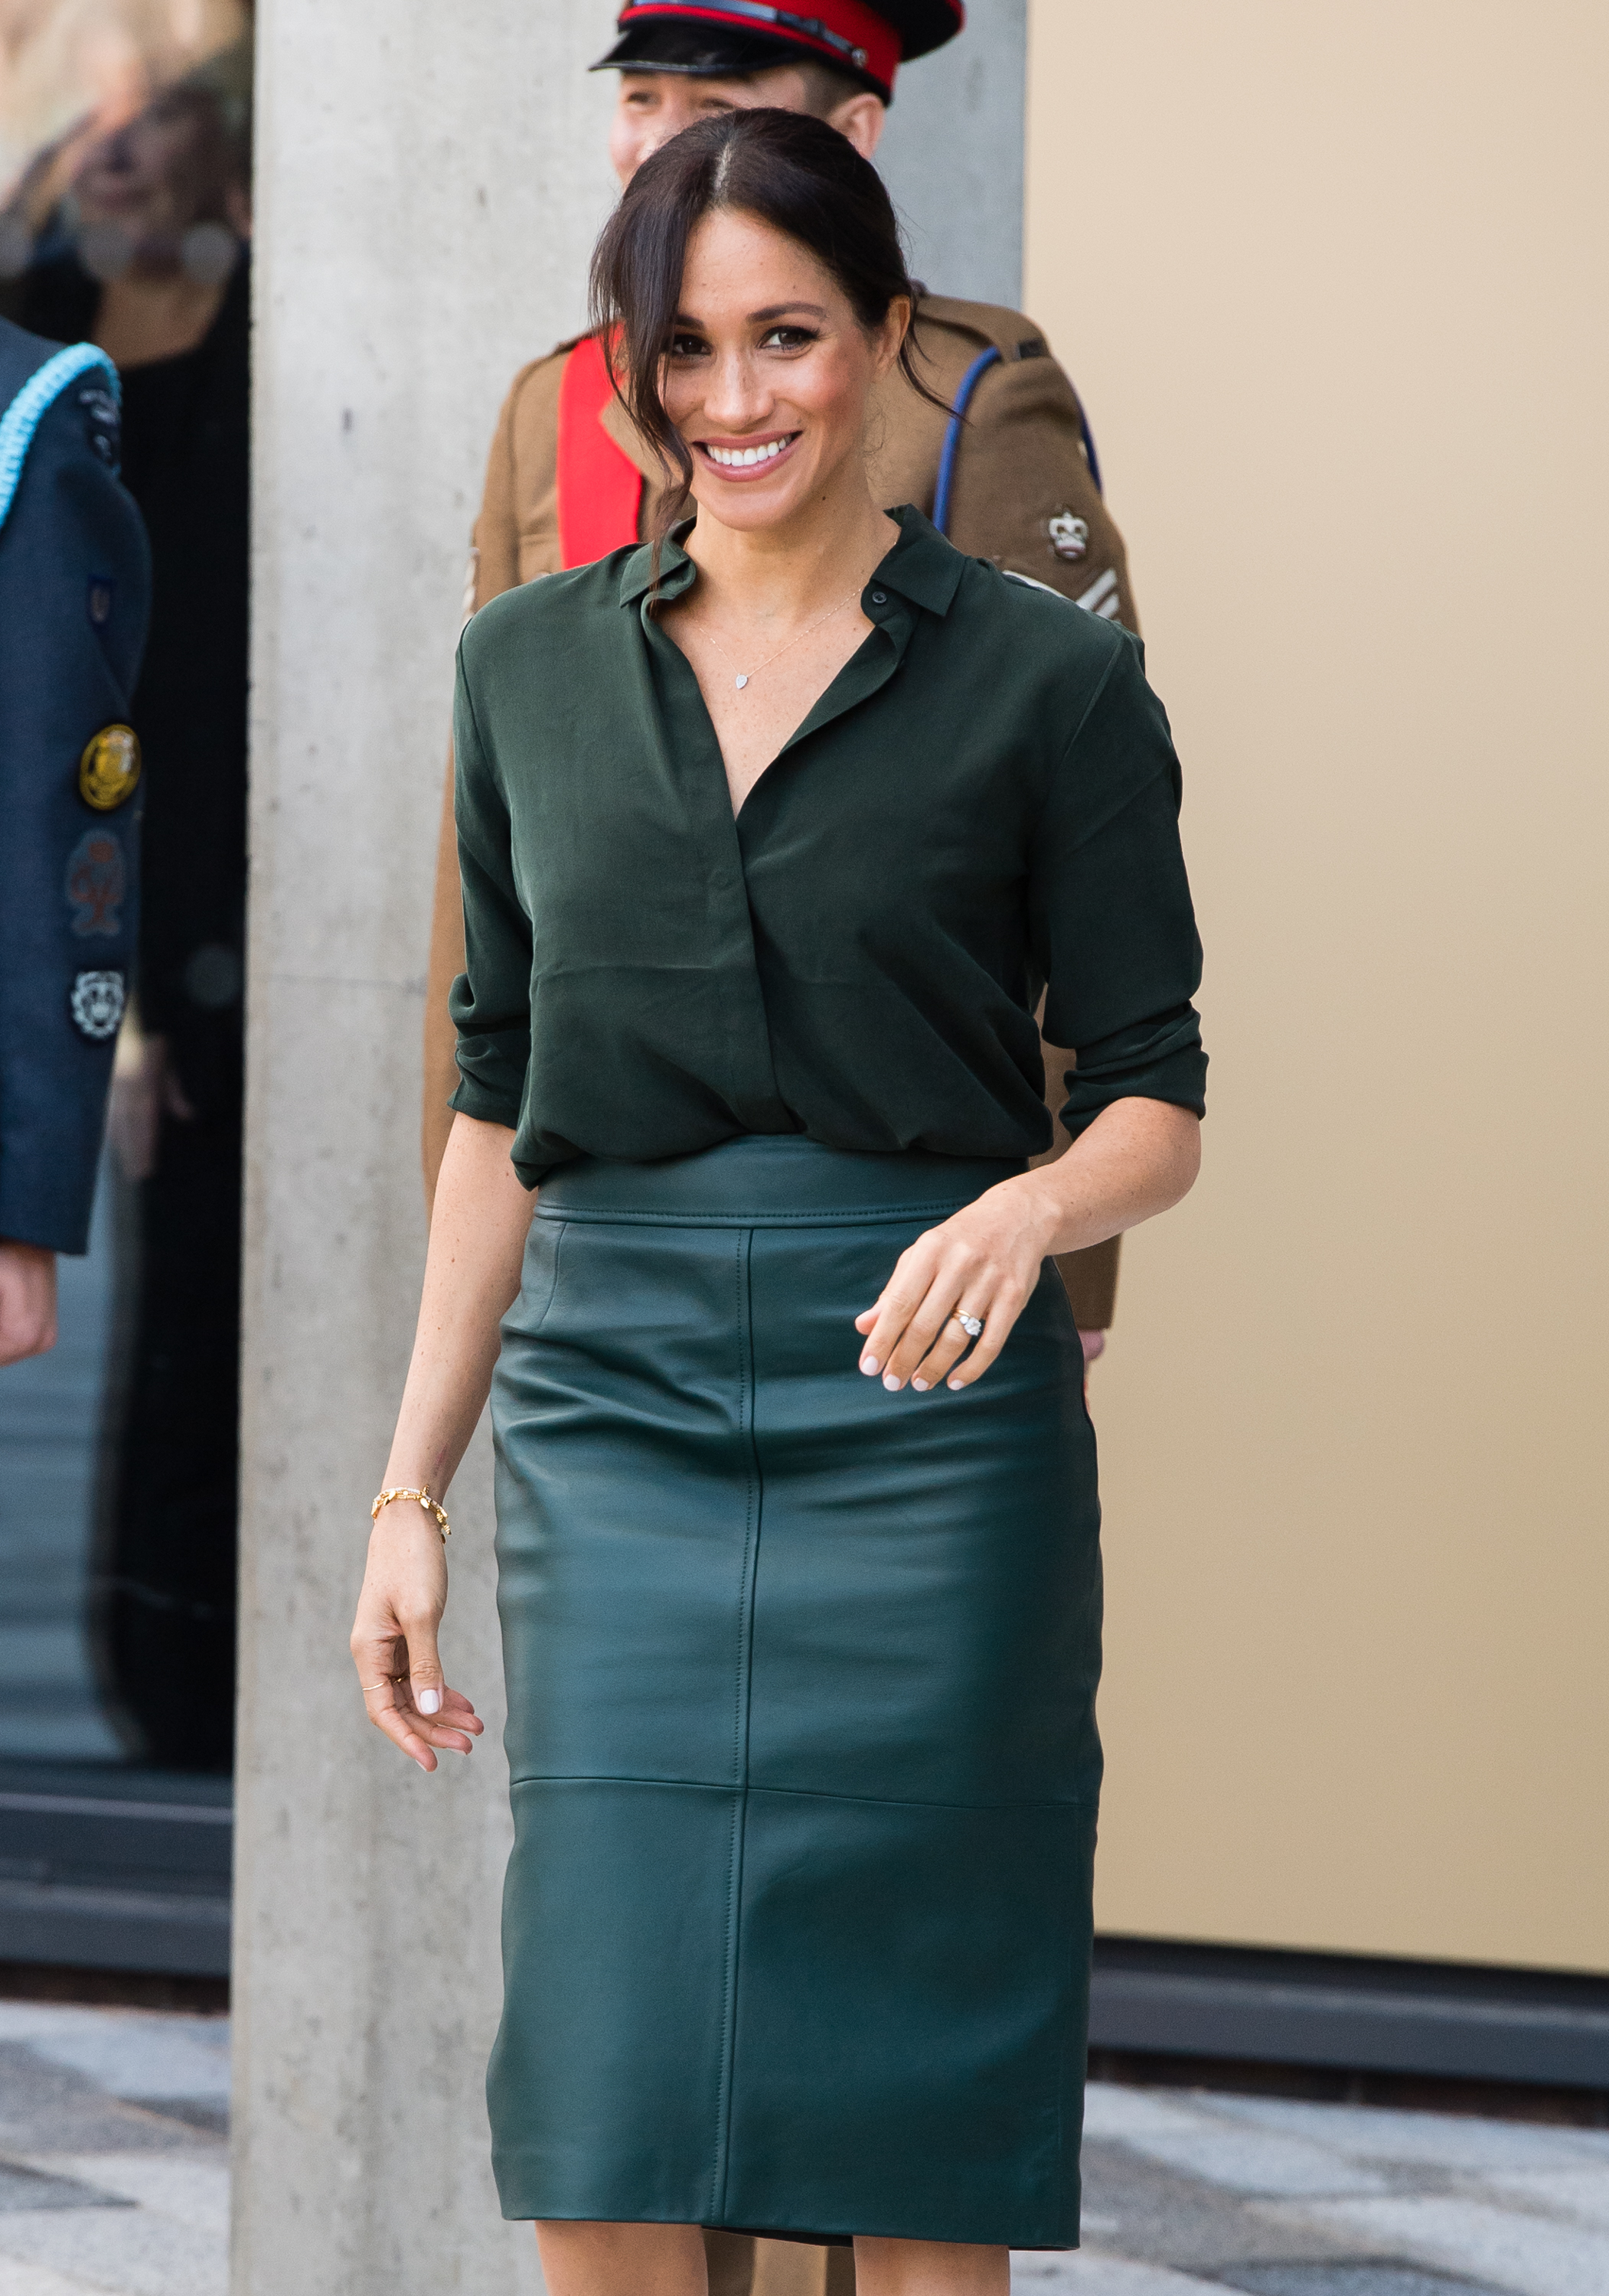 Royal Fashion Involves Wearing Monochromatic Outfits — Take A Look ...